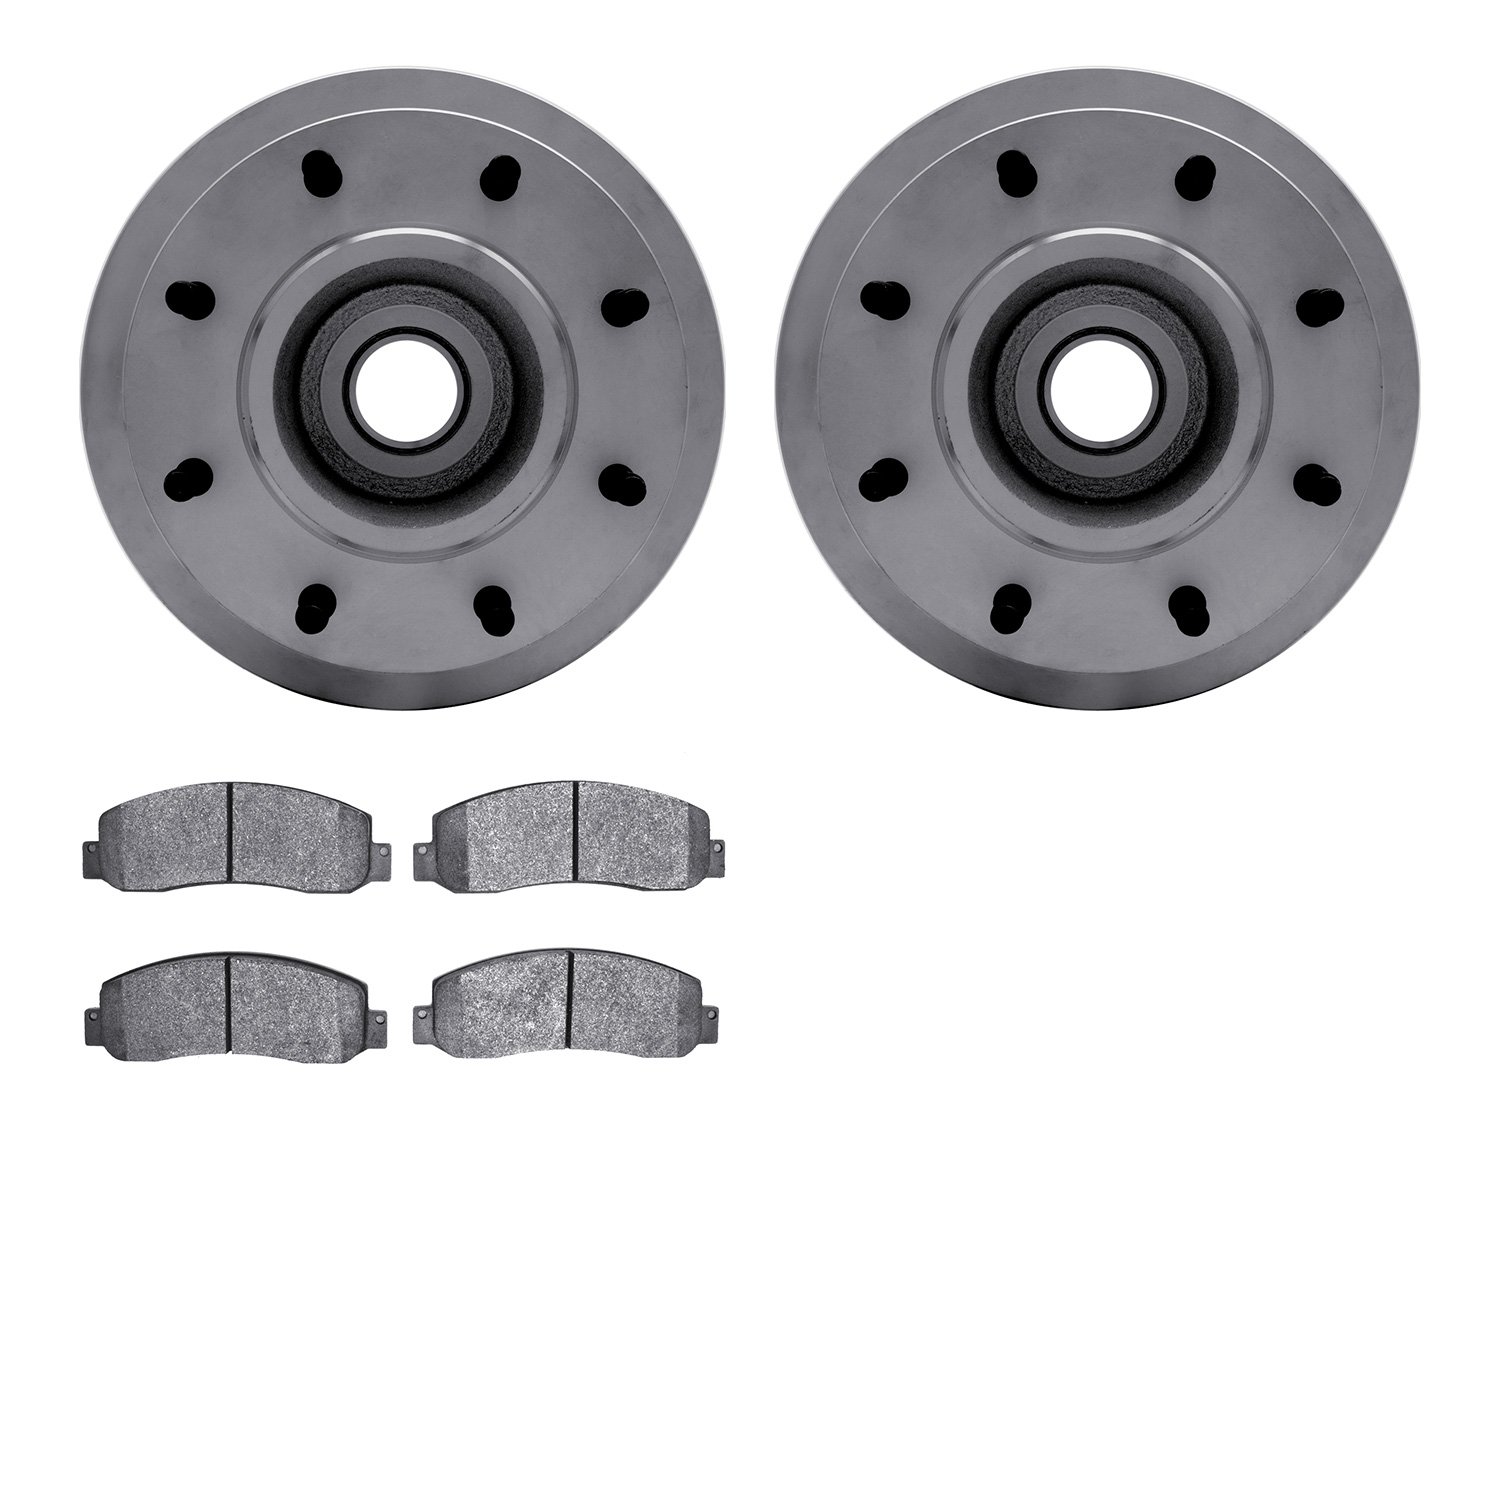 4402-54061 Geospec Brake Rotors with Ultimate-Duty Brake Pads Kit, 2005-2007 Ford/Lincoln/Mercury/Mazda, Position: Front